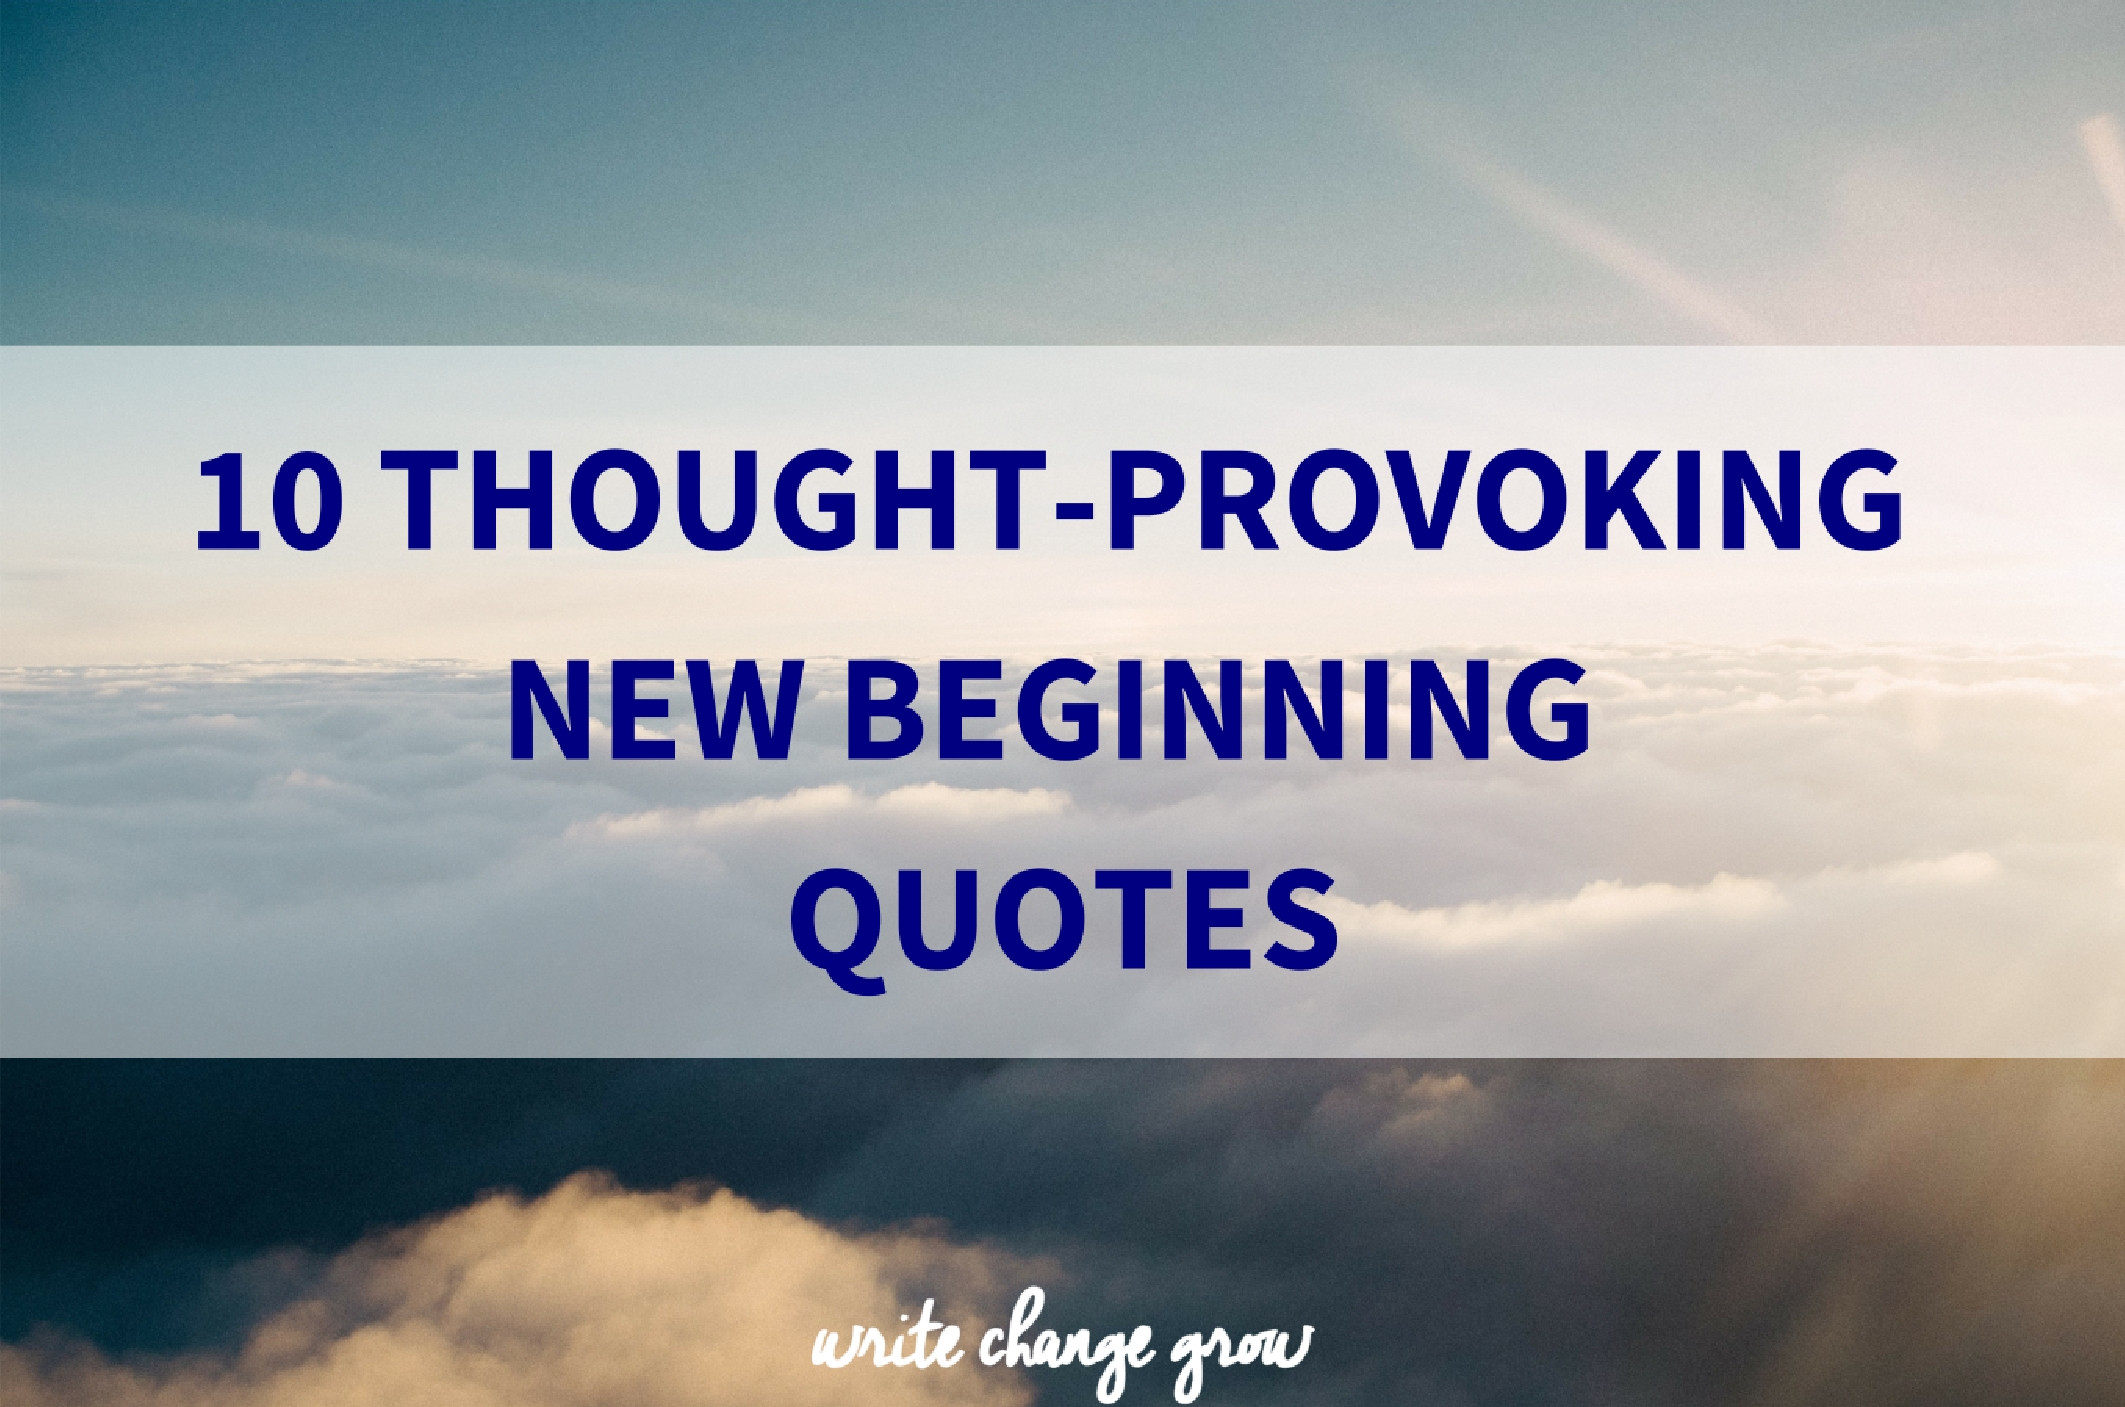 New Year New Beginning Quote
 10 Thought Provoking New Year New Beginnings Quotes